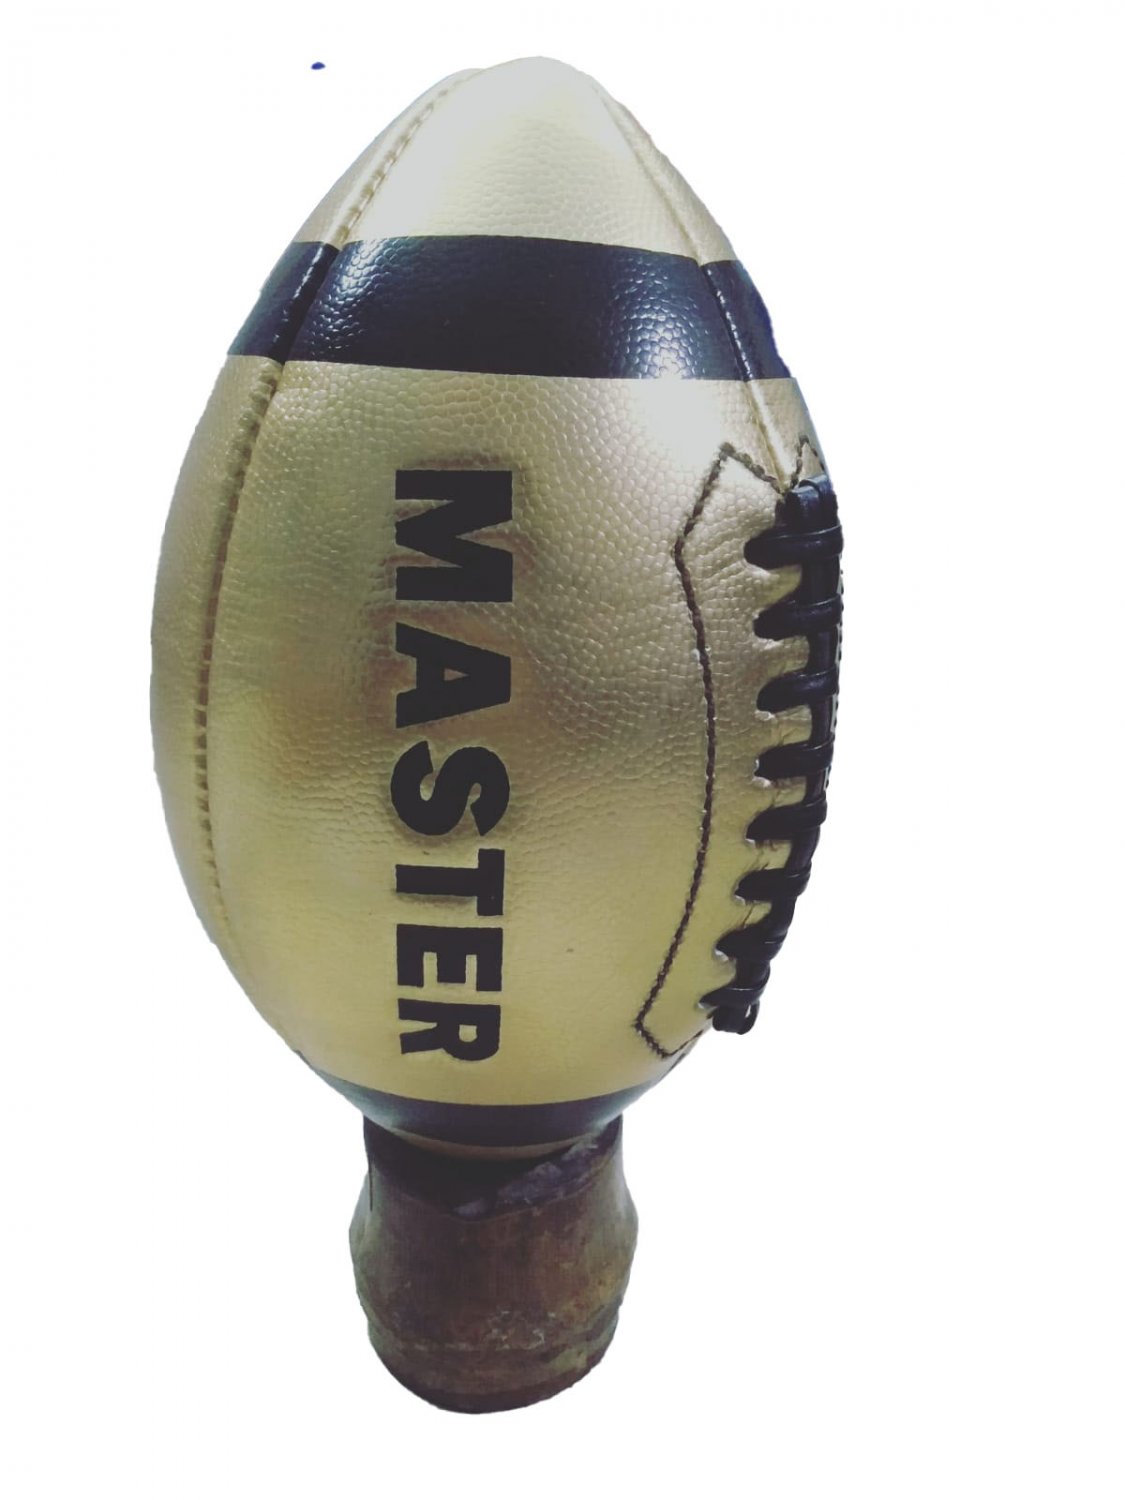 Authentic American "MASTER" Football Ball, Official Size, Official Weight